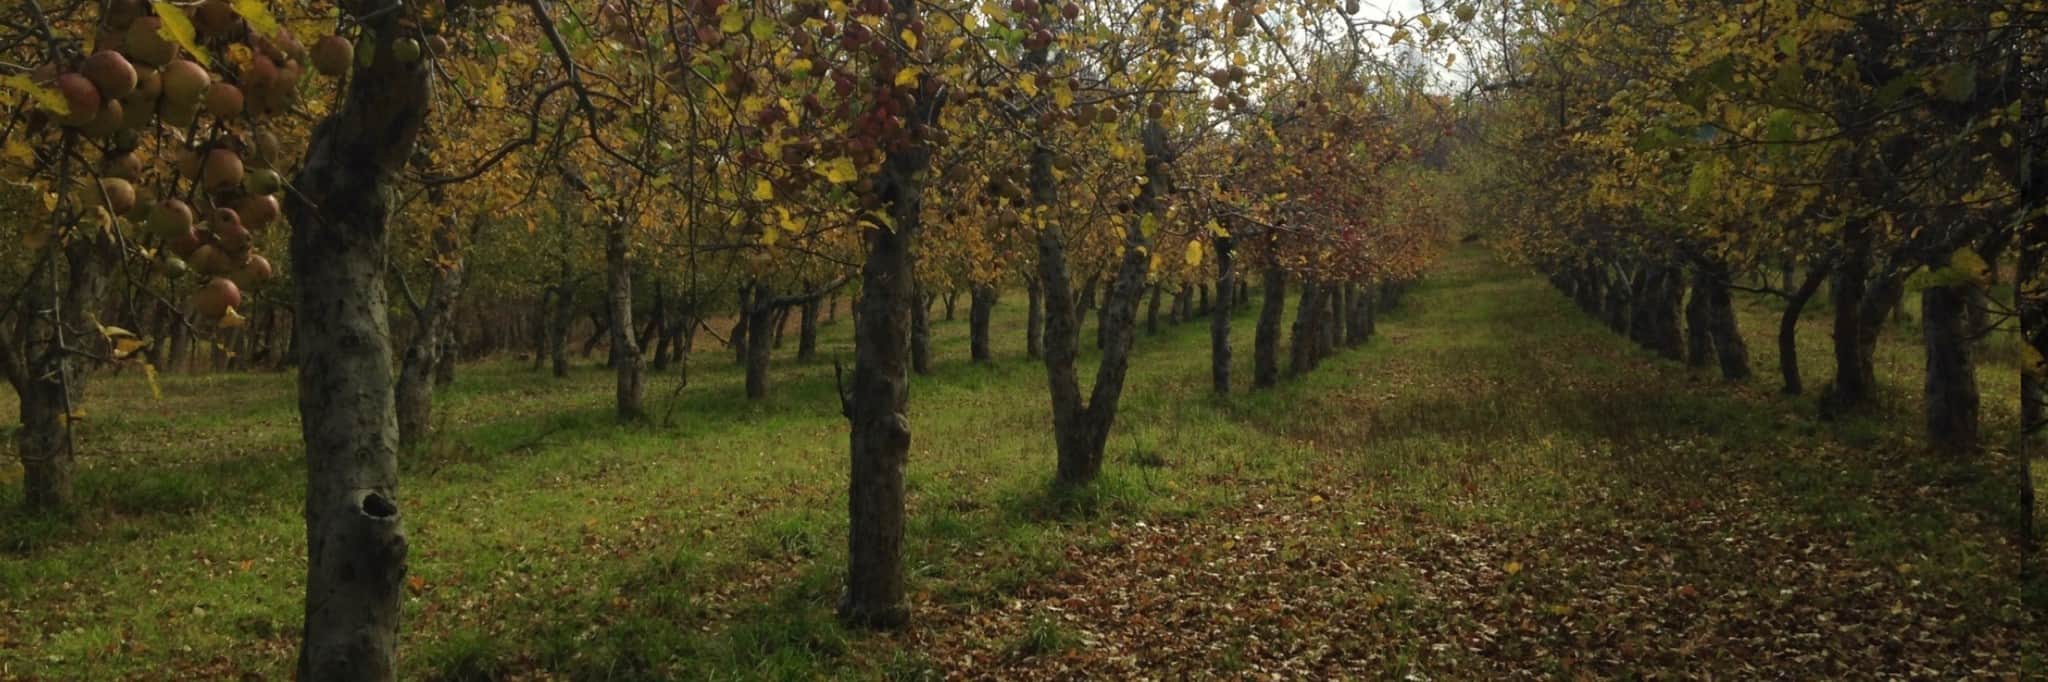 Orchard at Eve's Cidery